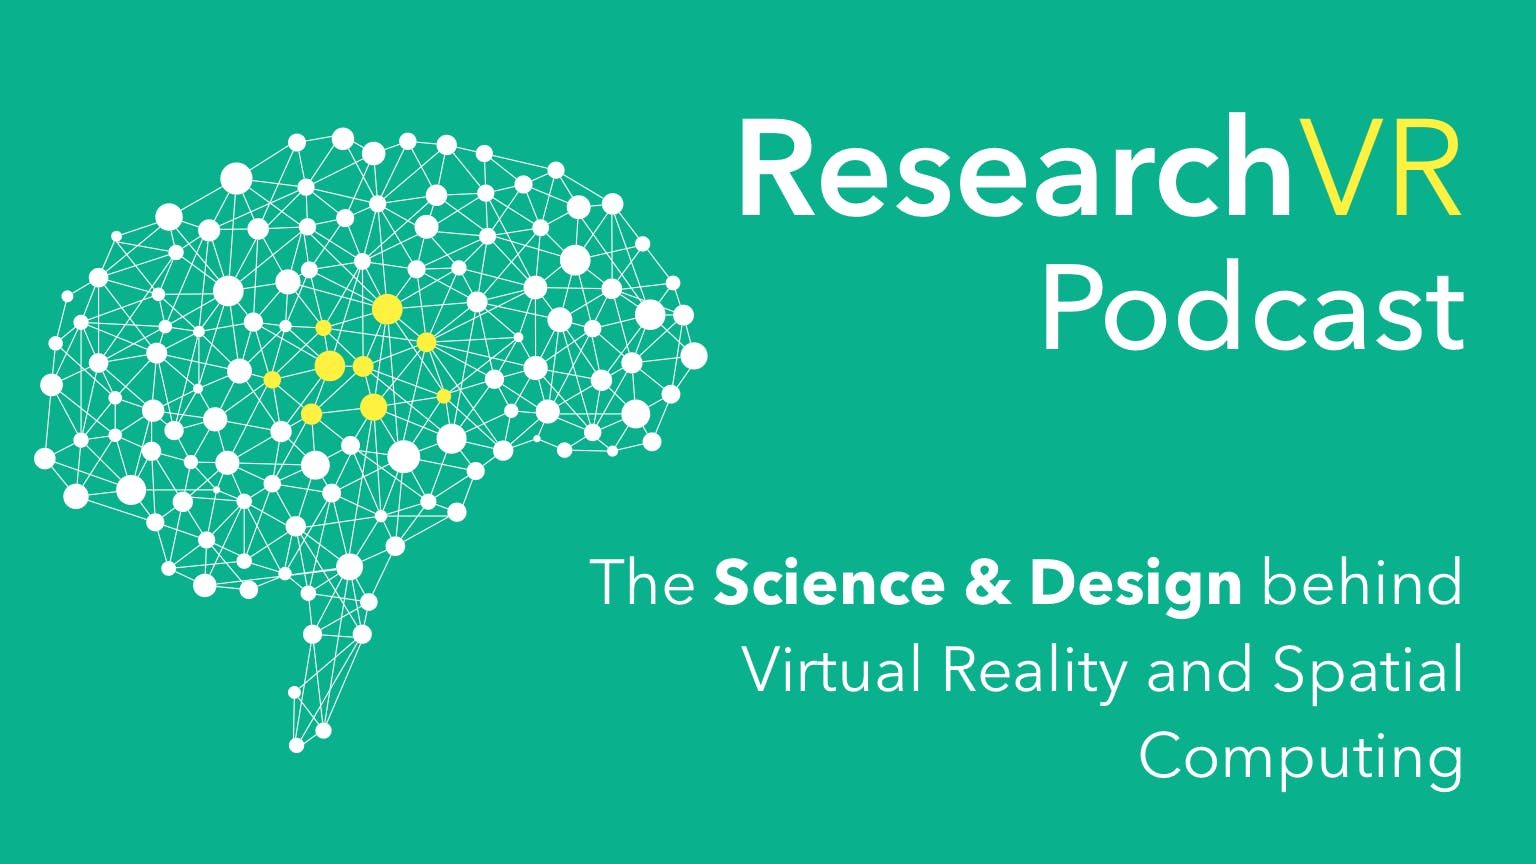 Research VR Podcast media 1